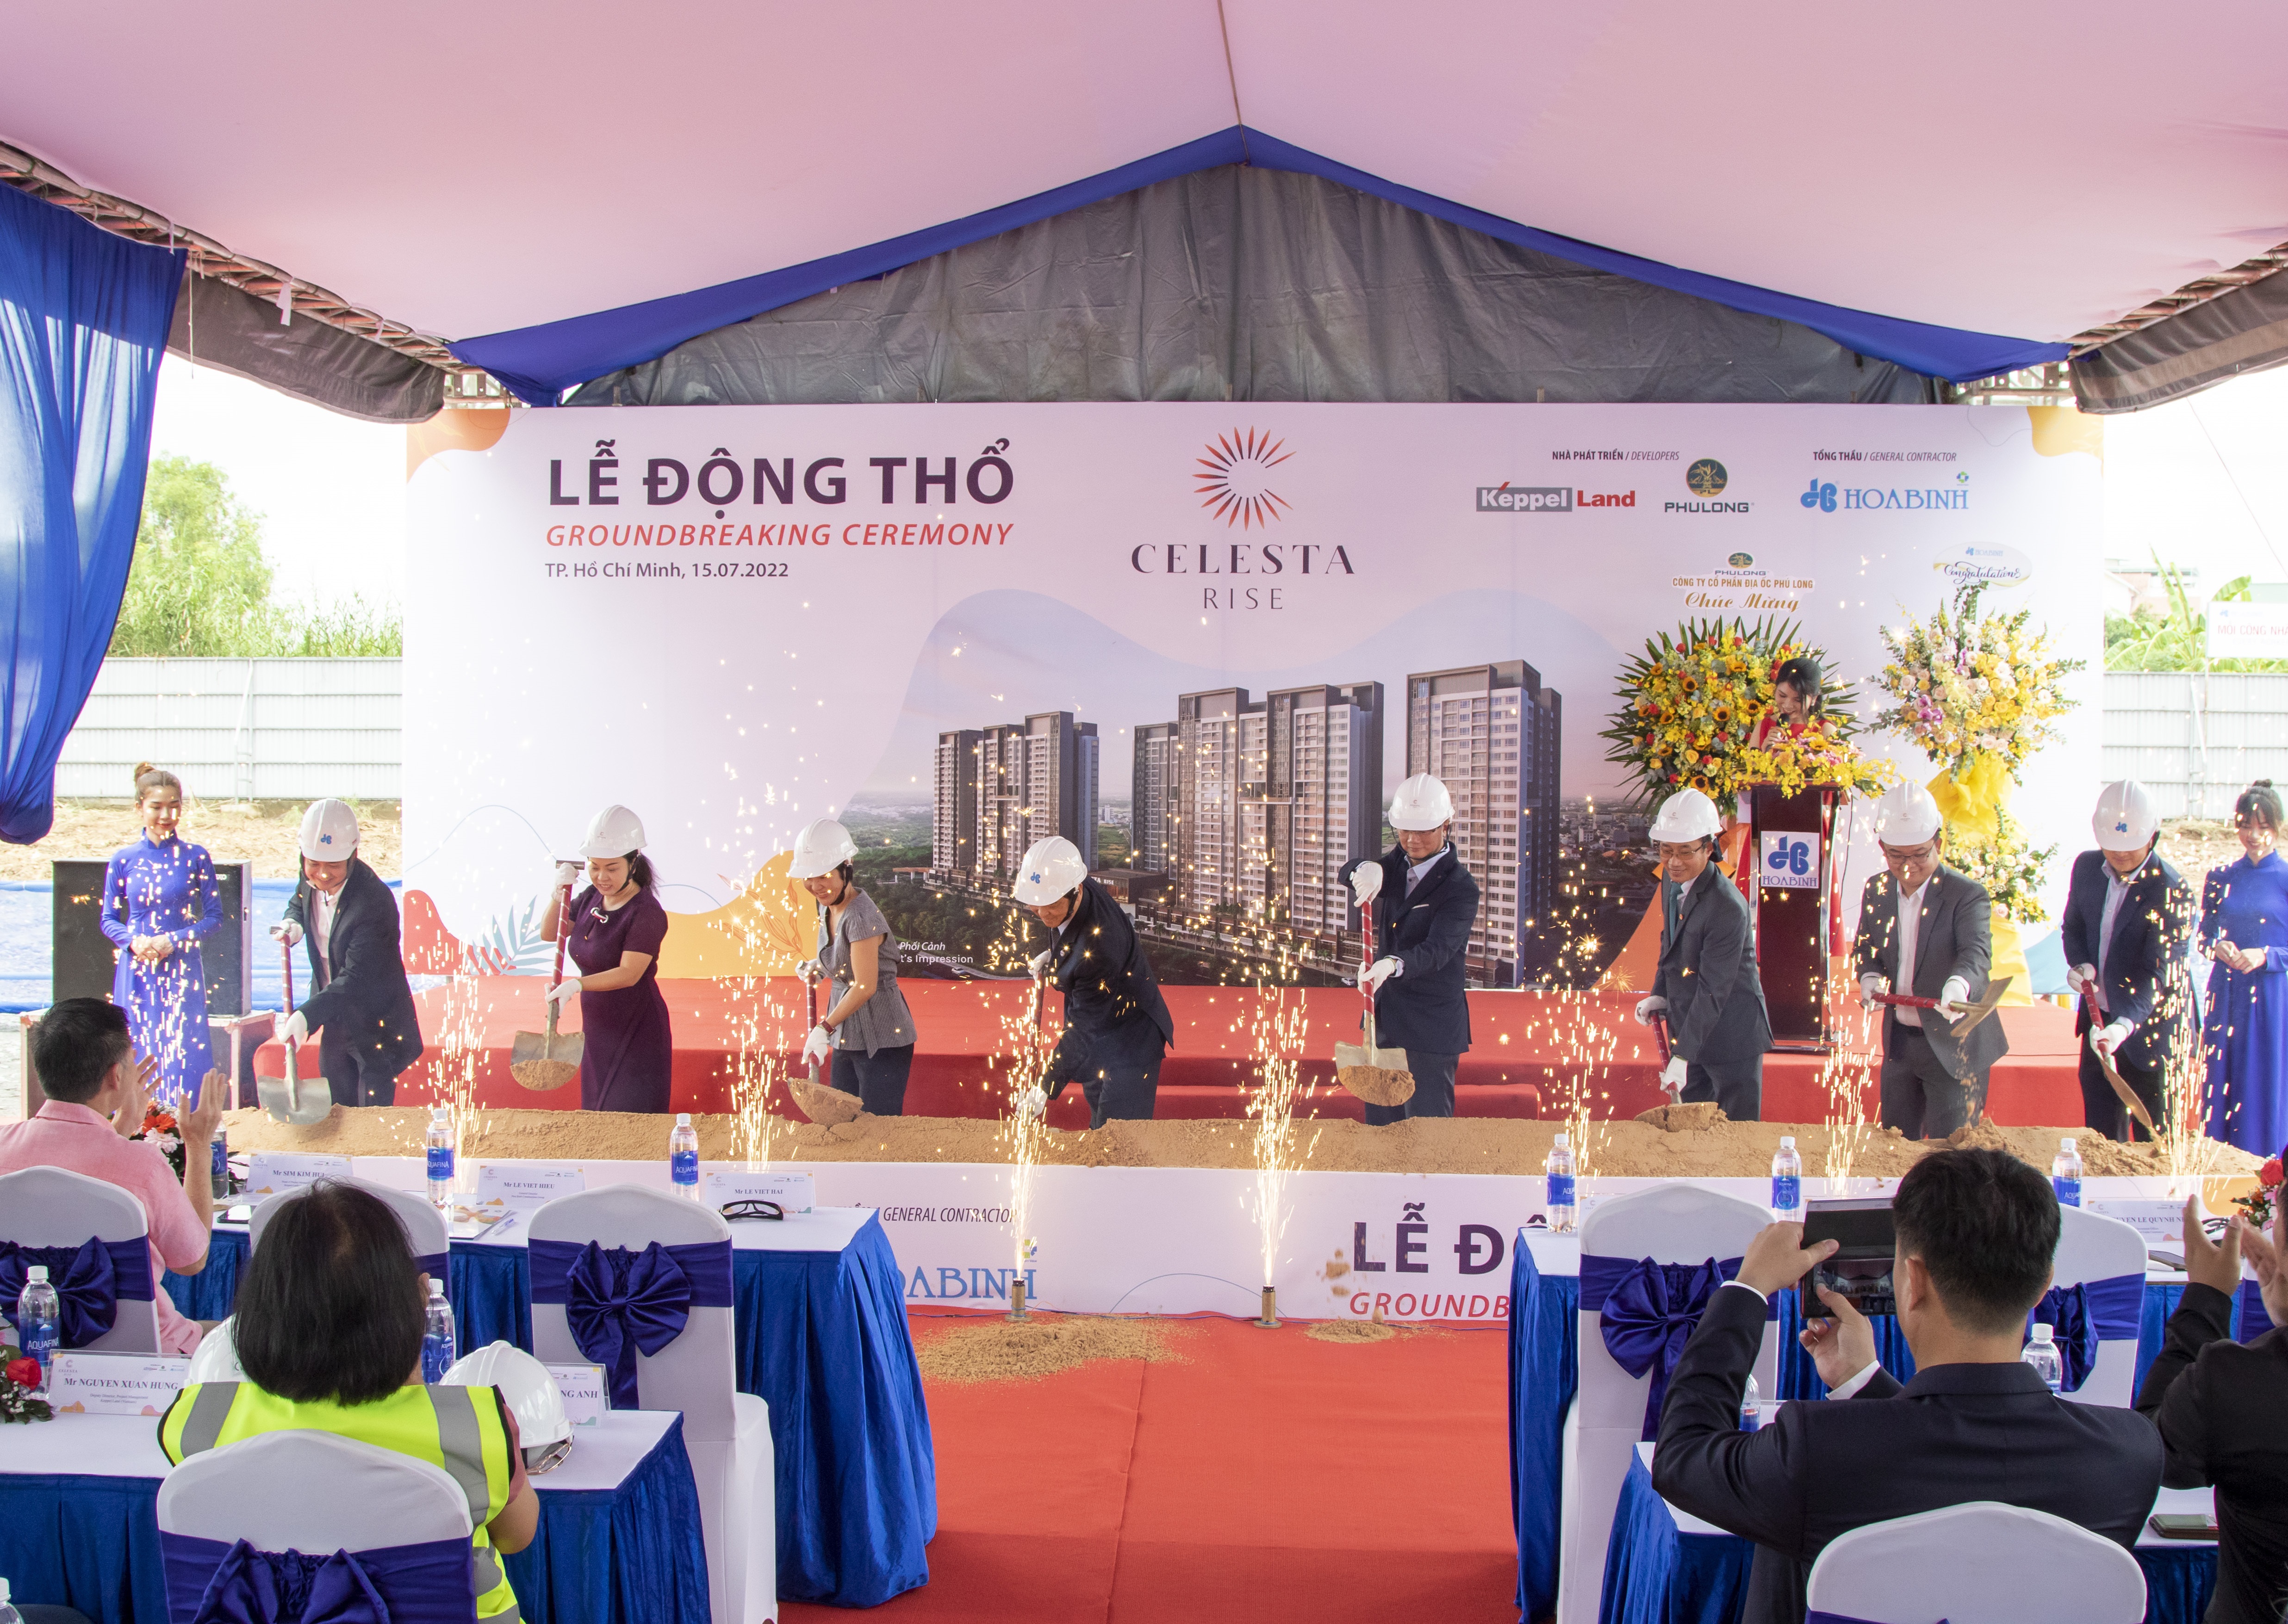 Representatives from Keppel Land, Phu Long and Hoa Binh participated in the Celesta Rise groundbreaking ceremony